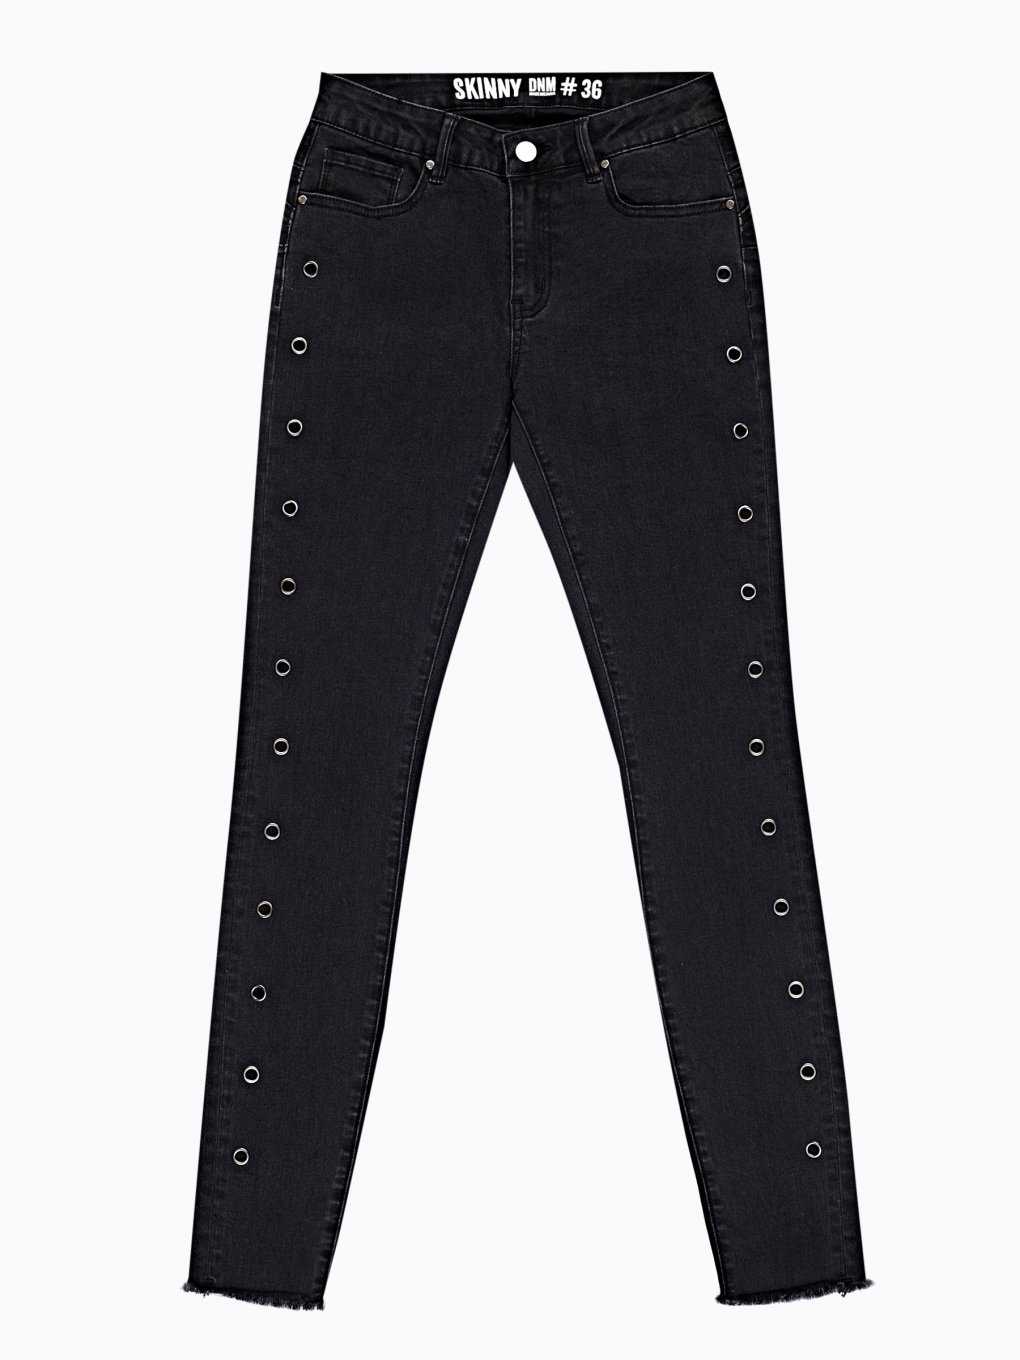 Skinny jeans with metal eyelets